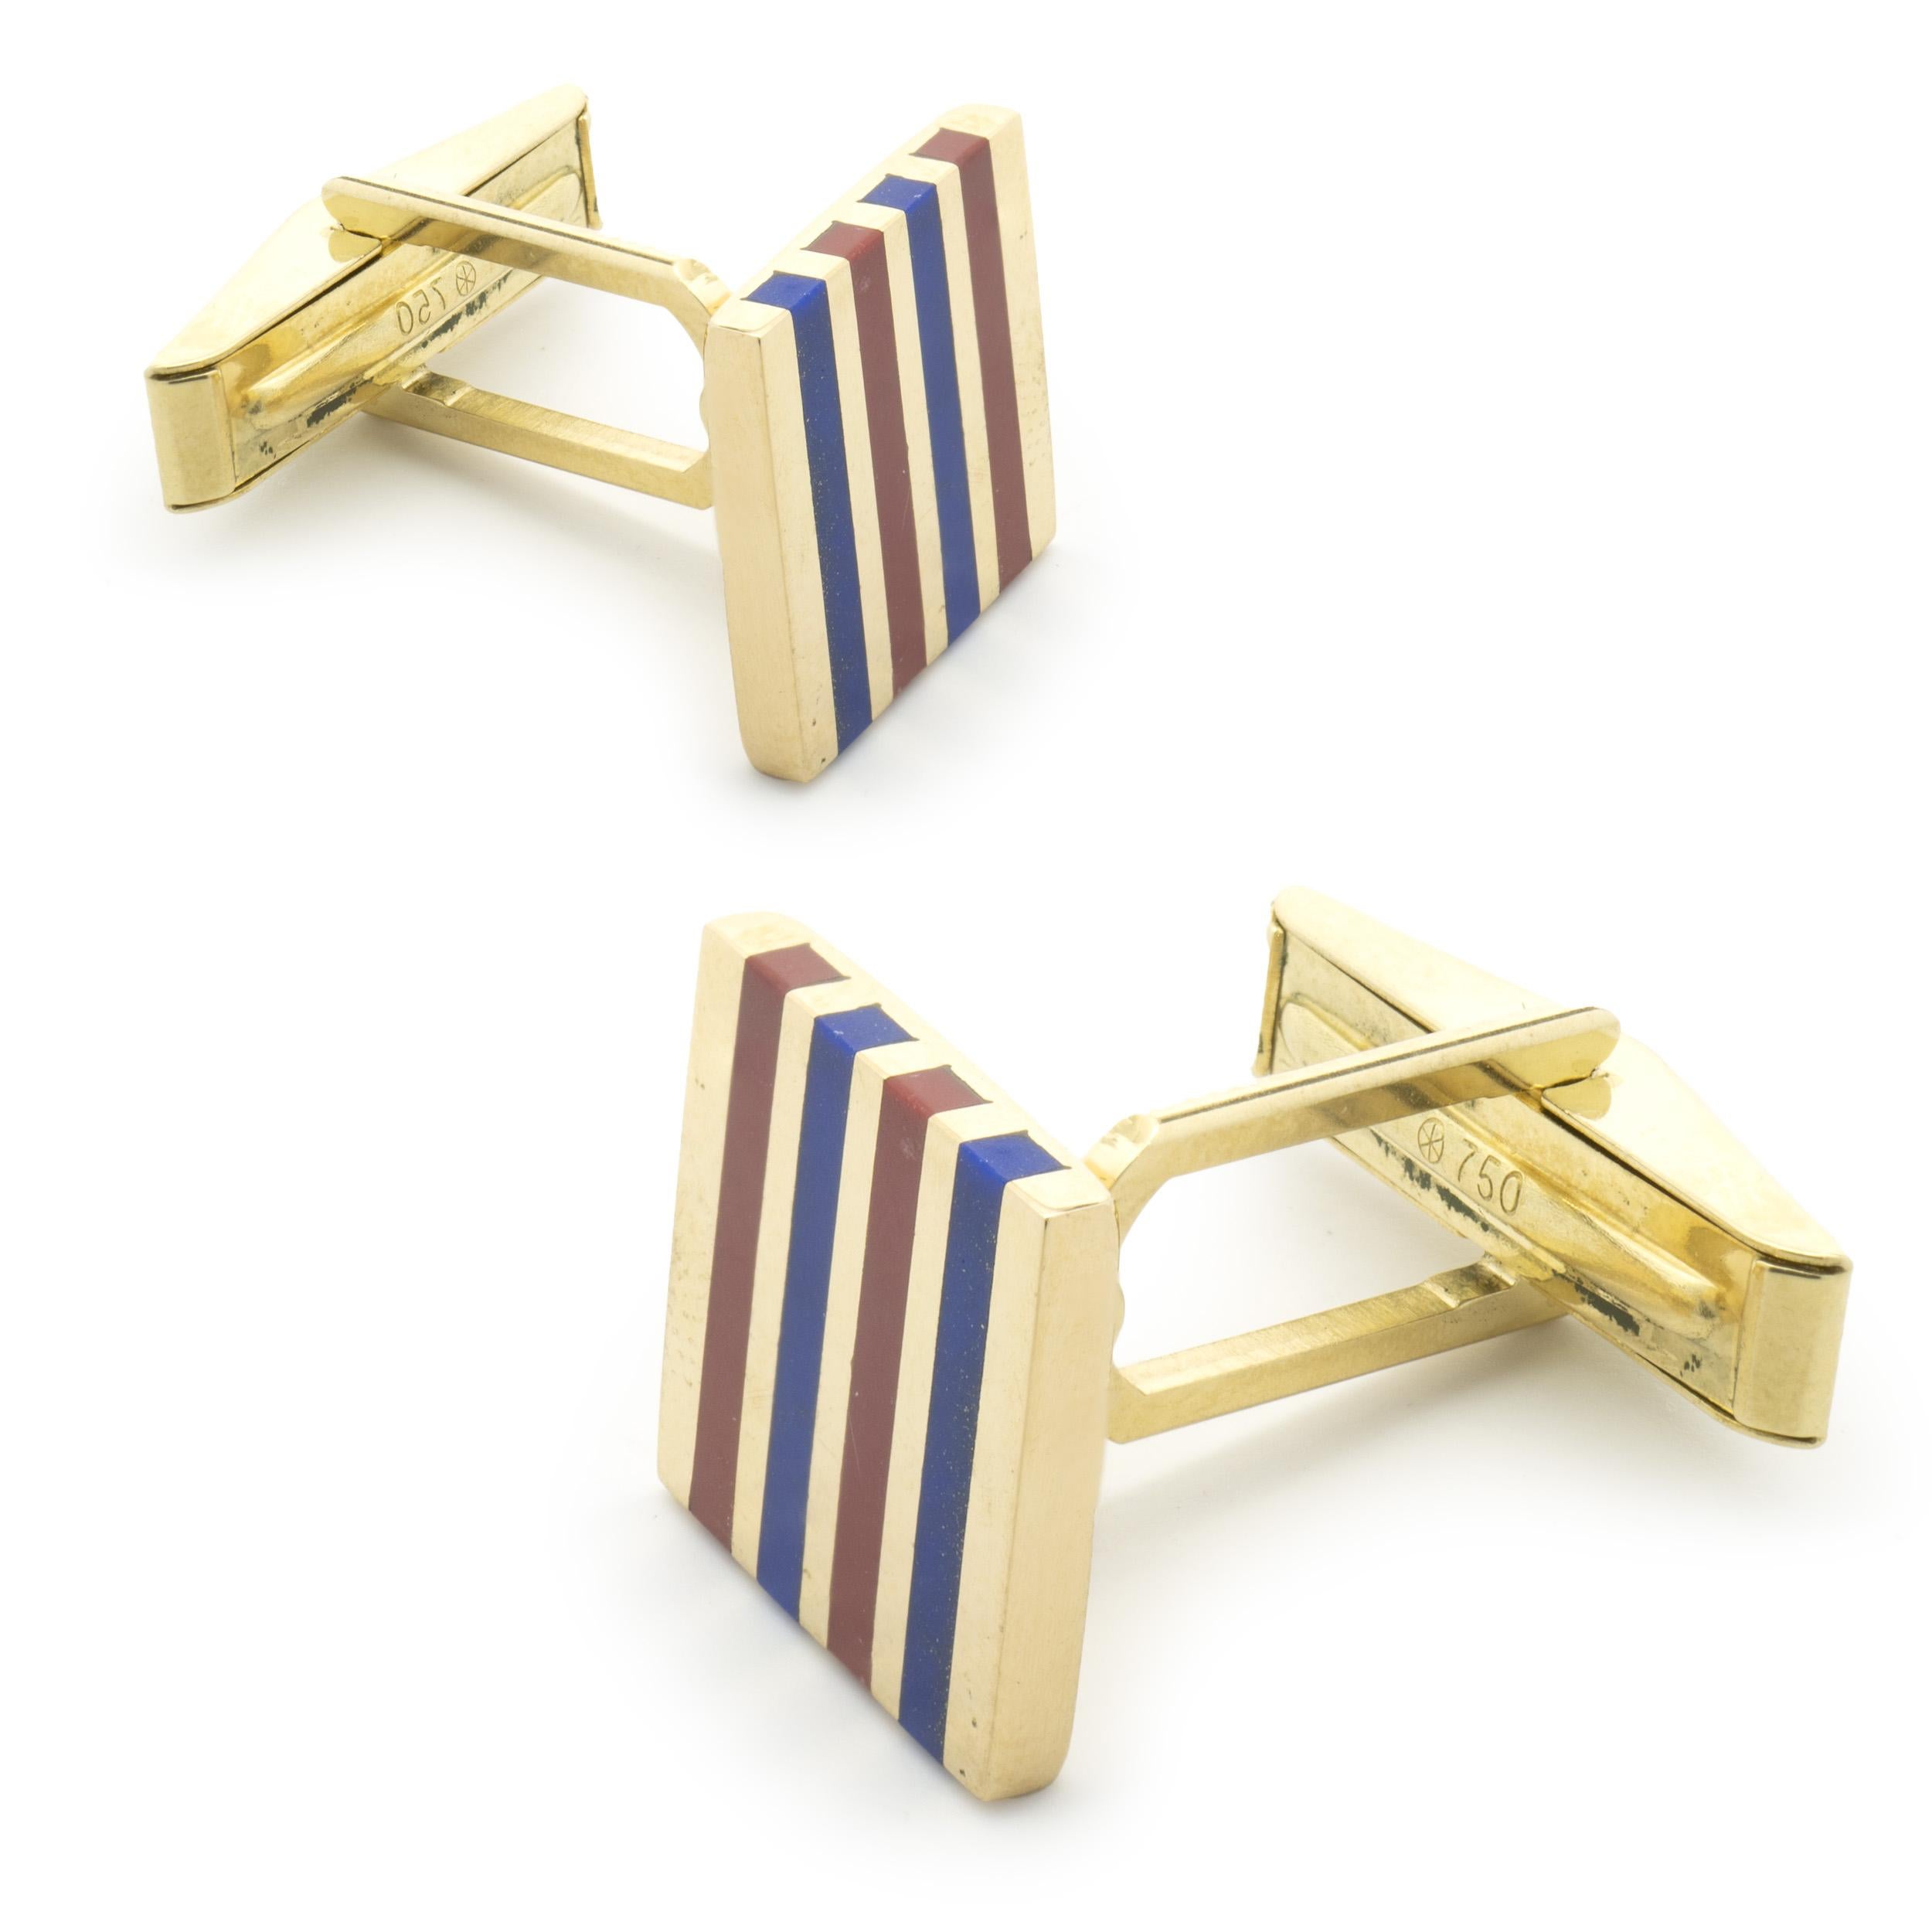 Material: 18K yellow gold
Dimensions: cufflinks measure 20.5mm
Weight: 13.90 grams